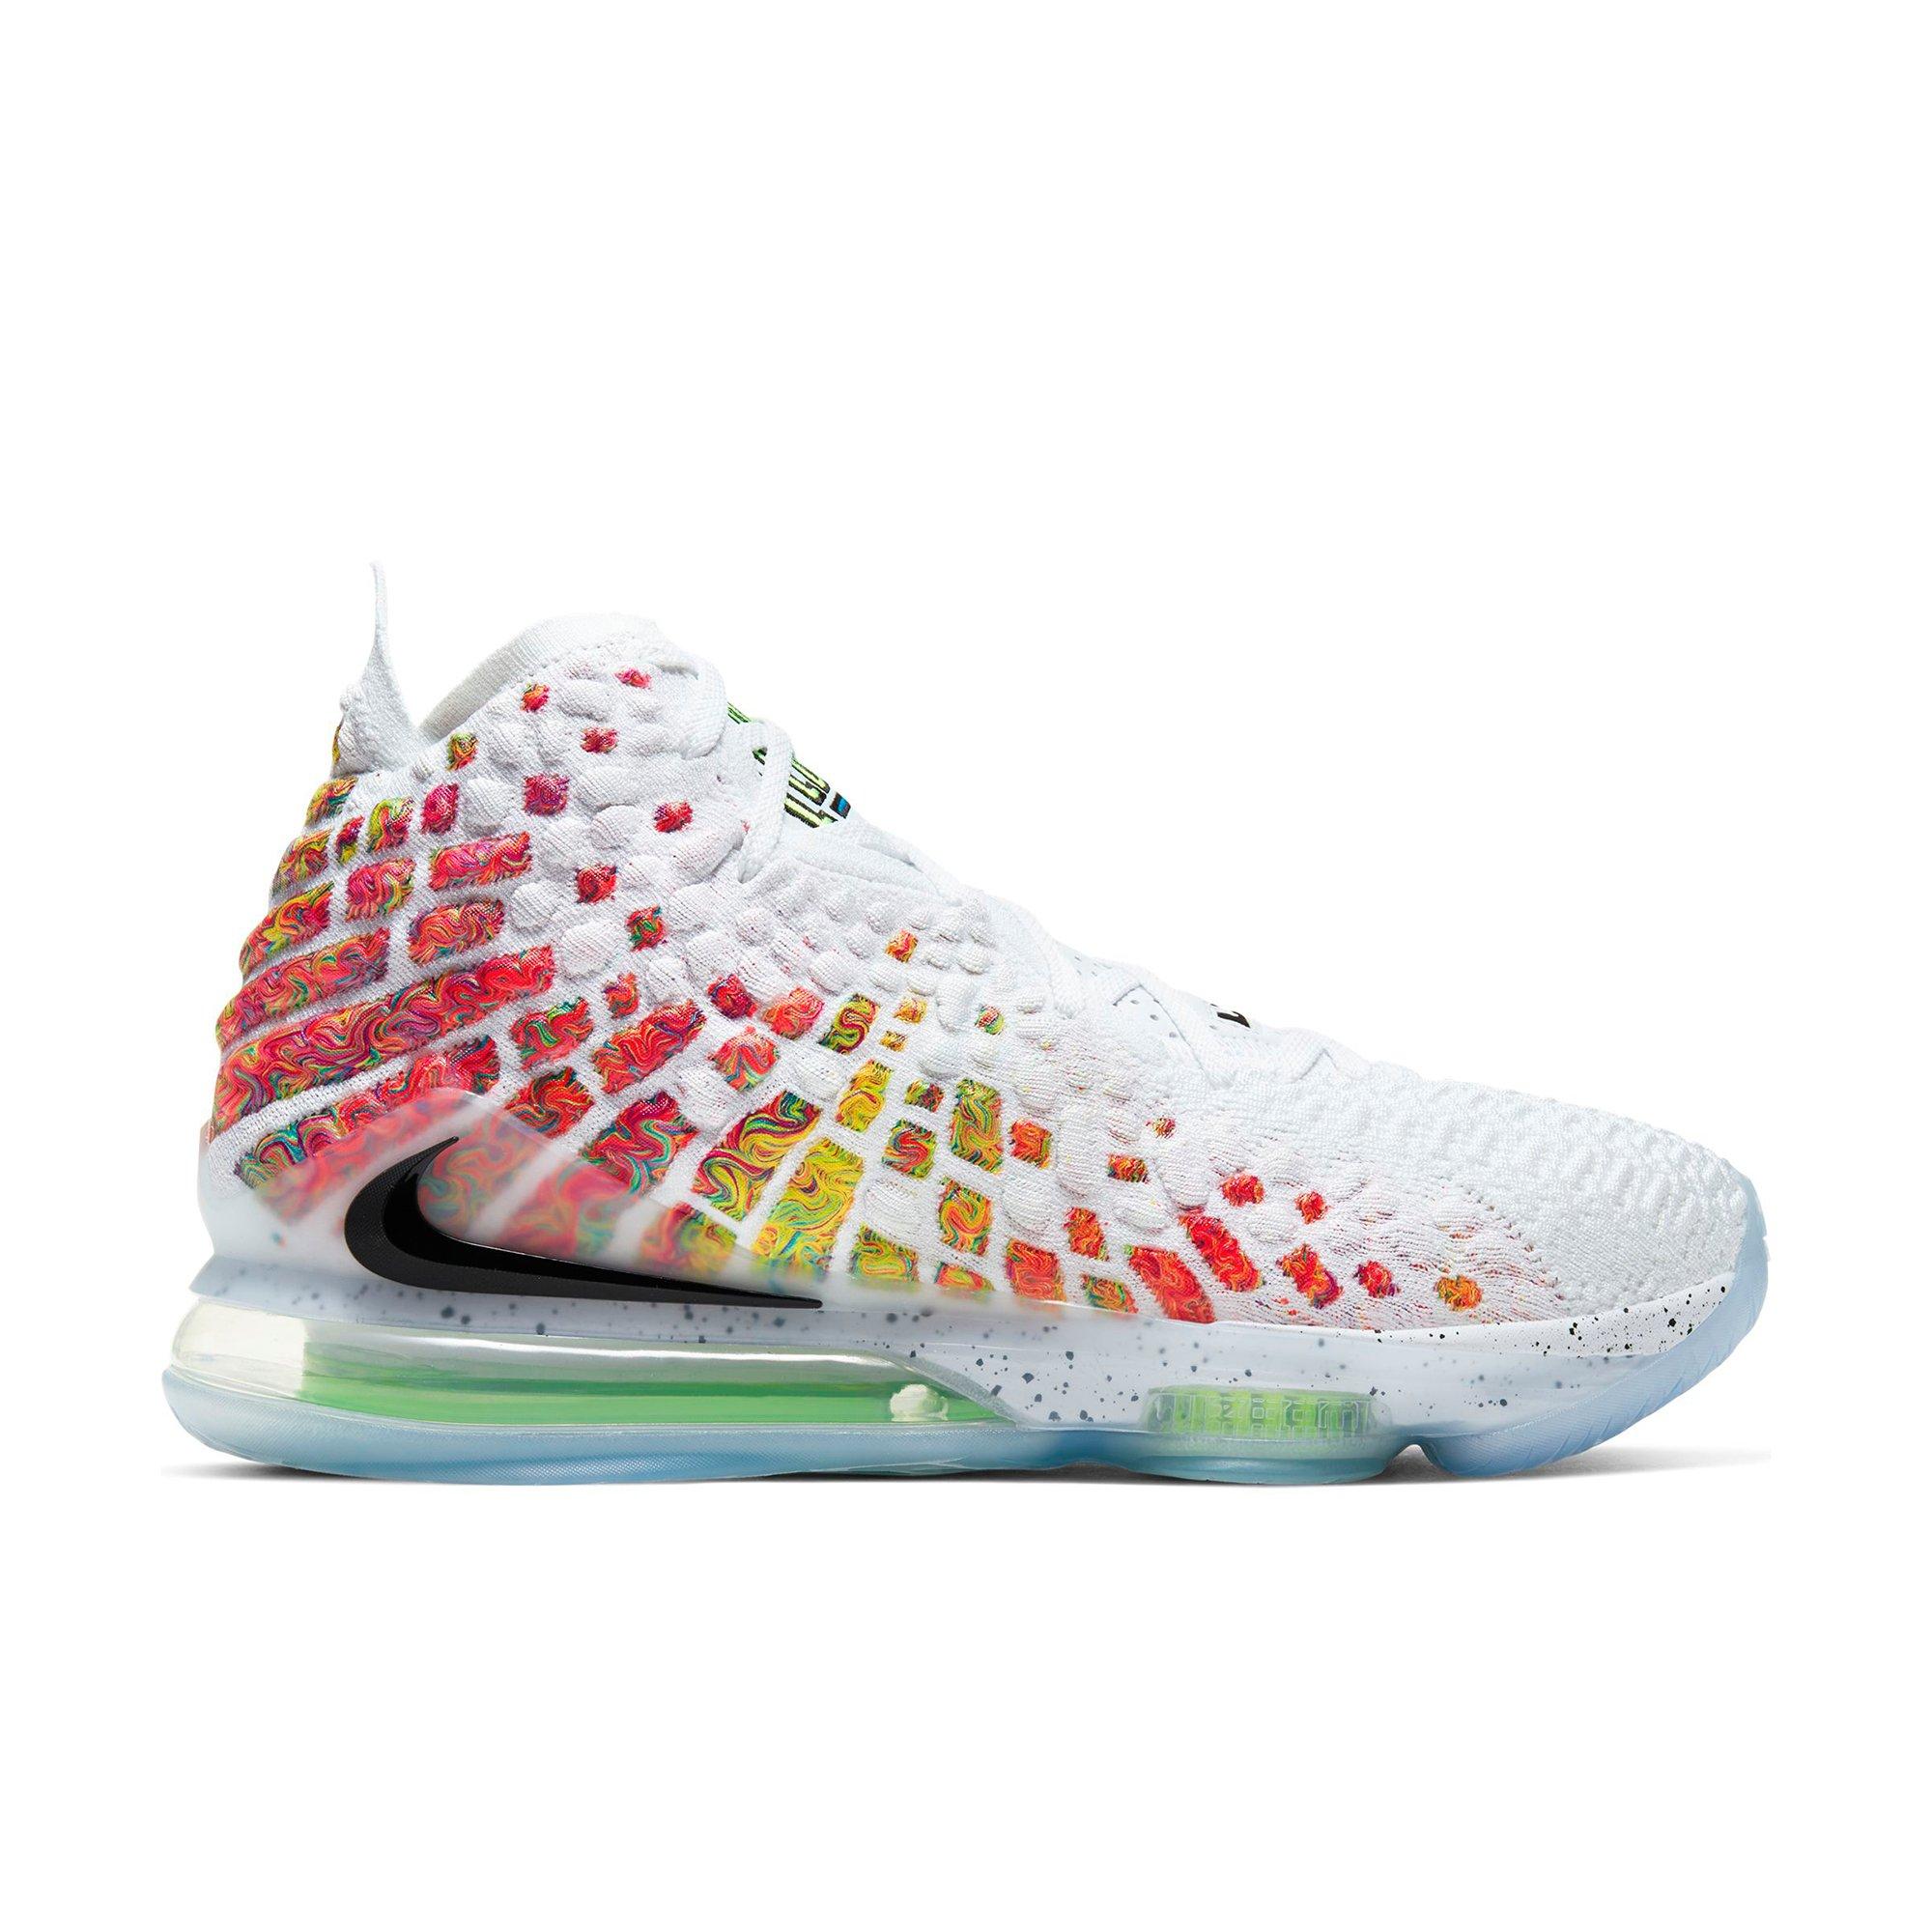 lebron james sneakers for women